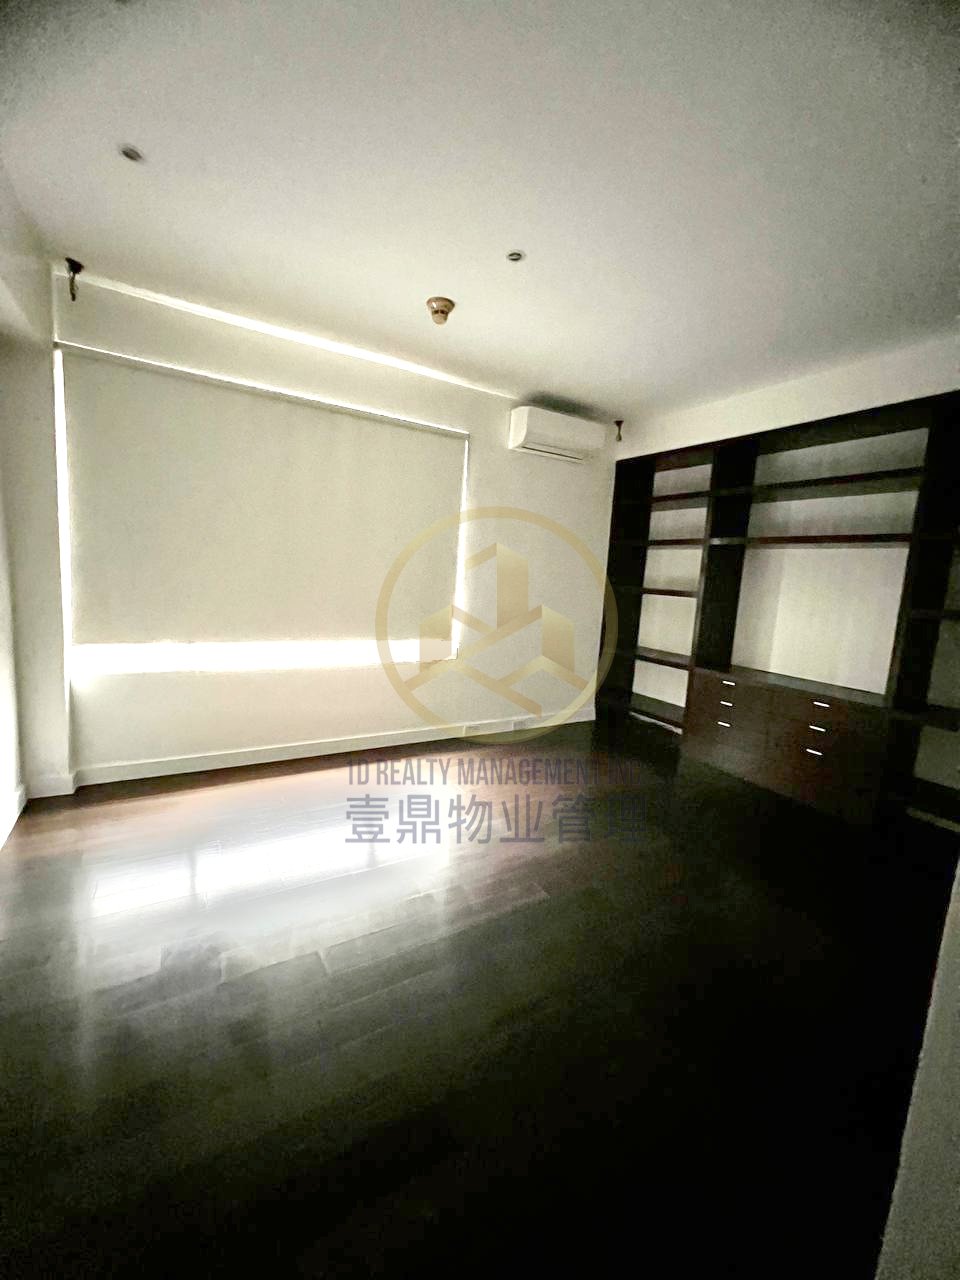 One Salcedo Place Makati City - For Lease